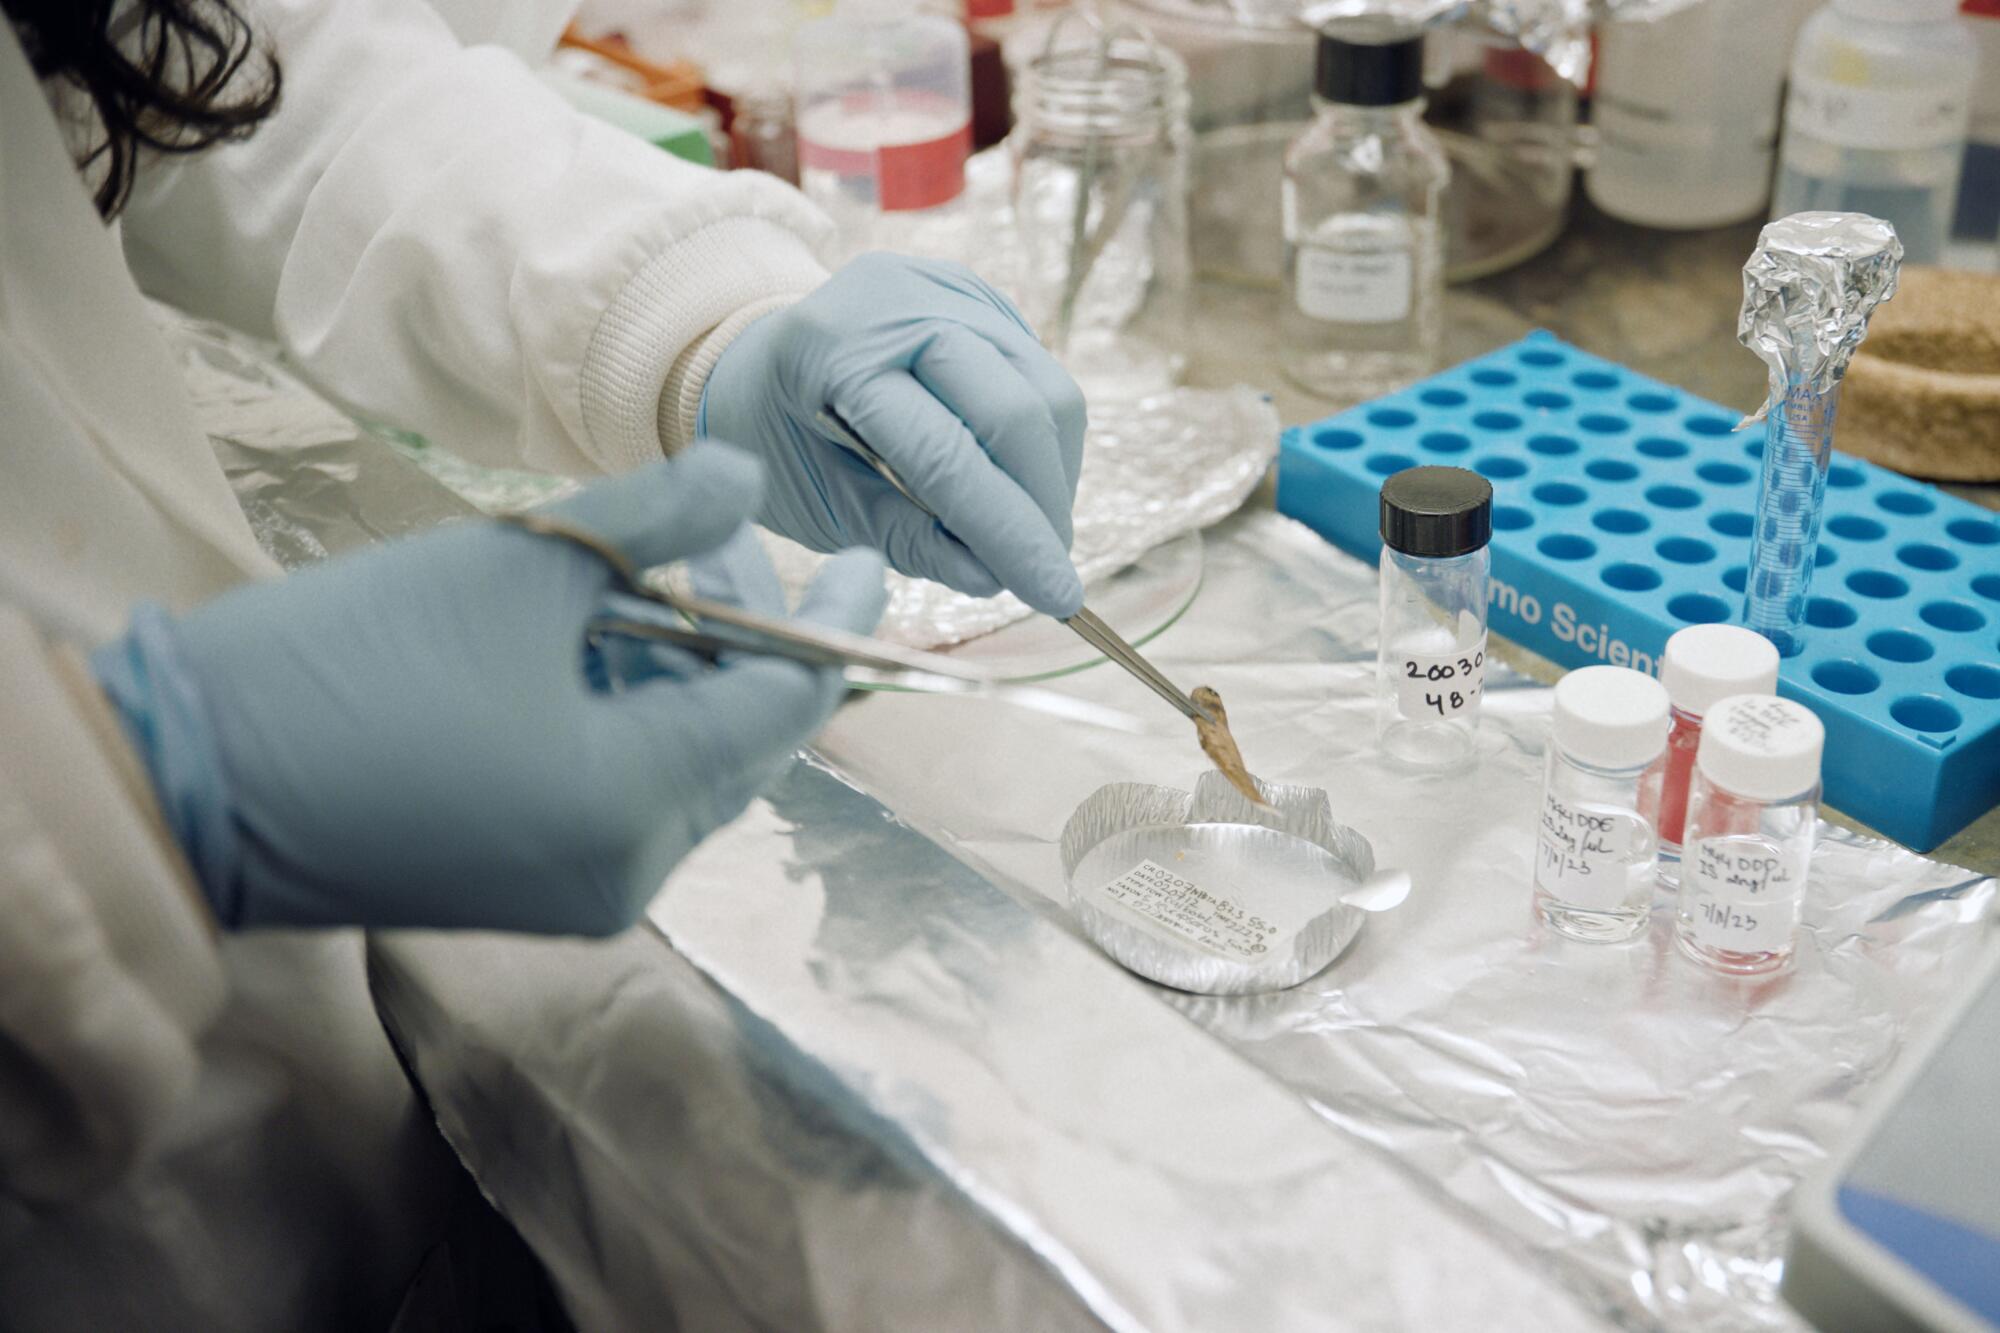 A scientist wearing blue gloves prepares a tiny fish for analysis.